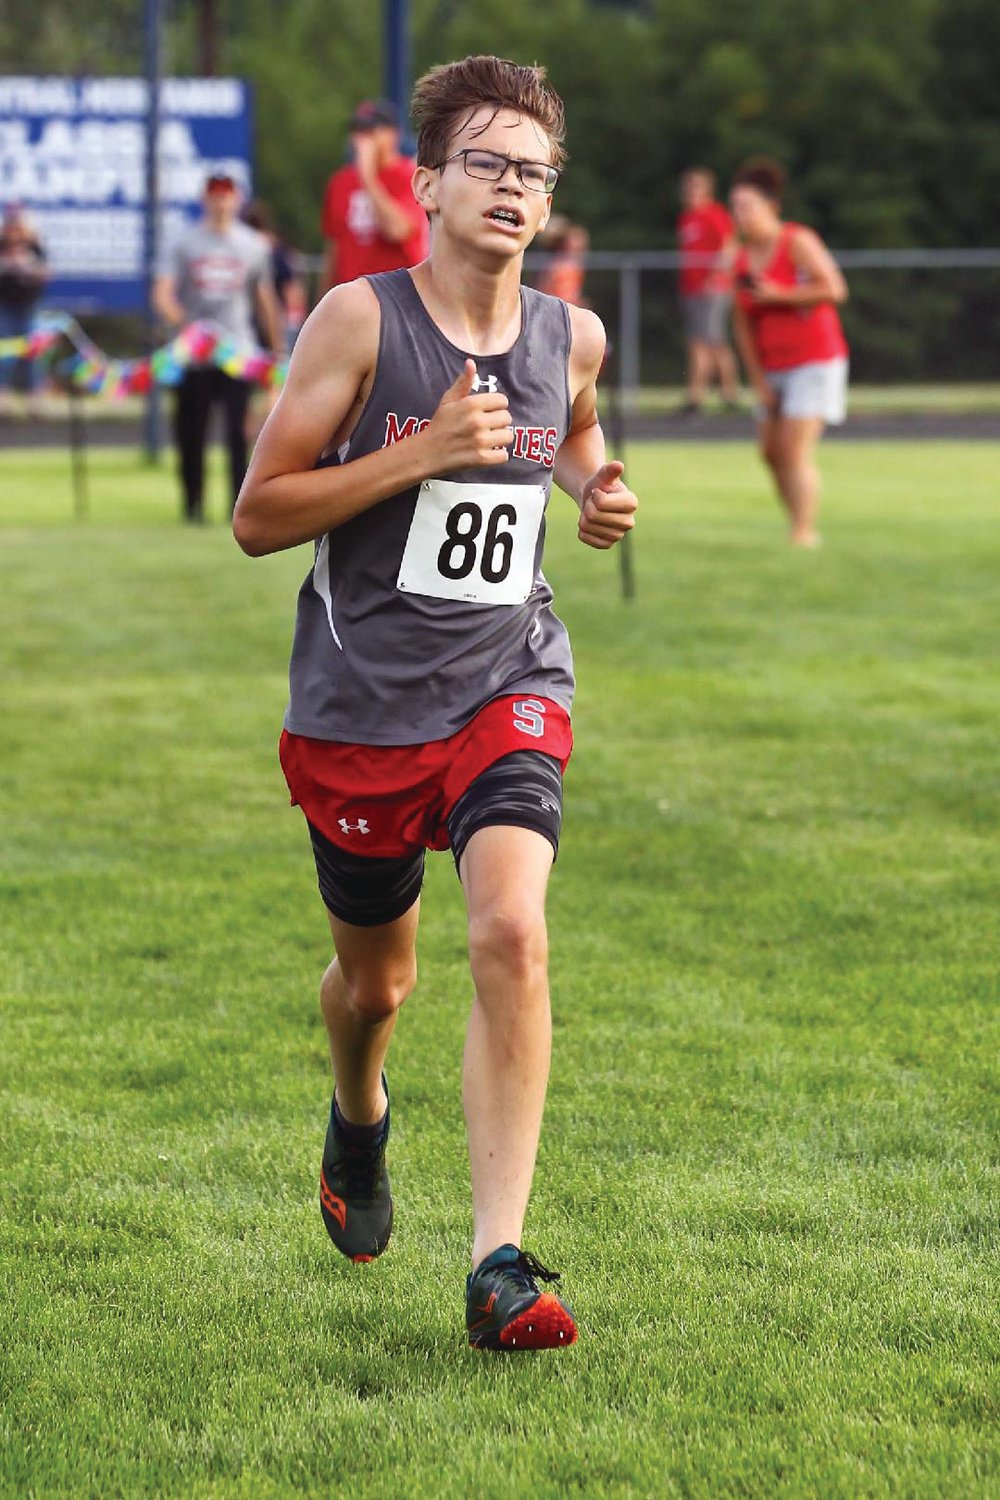 Southmont's Hunter Alesi placed 26th.